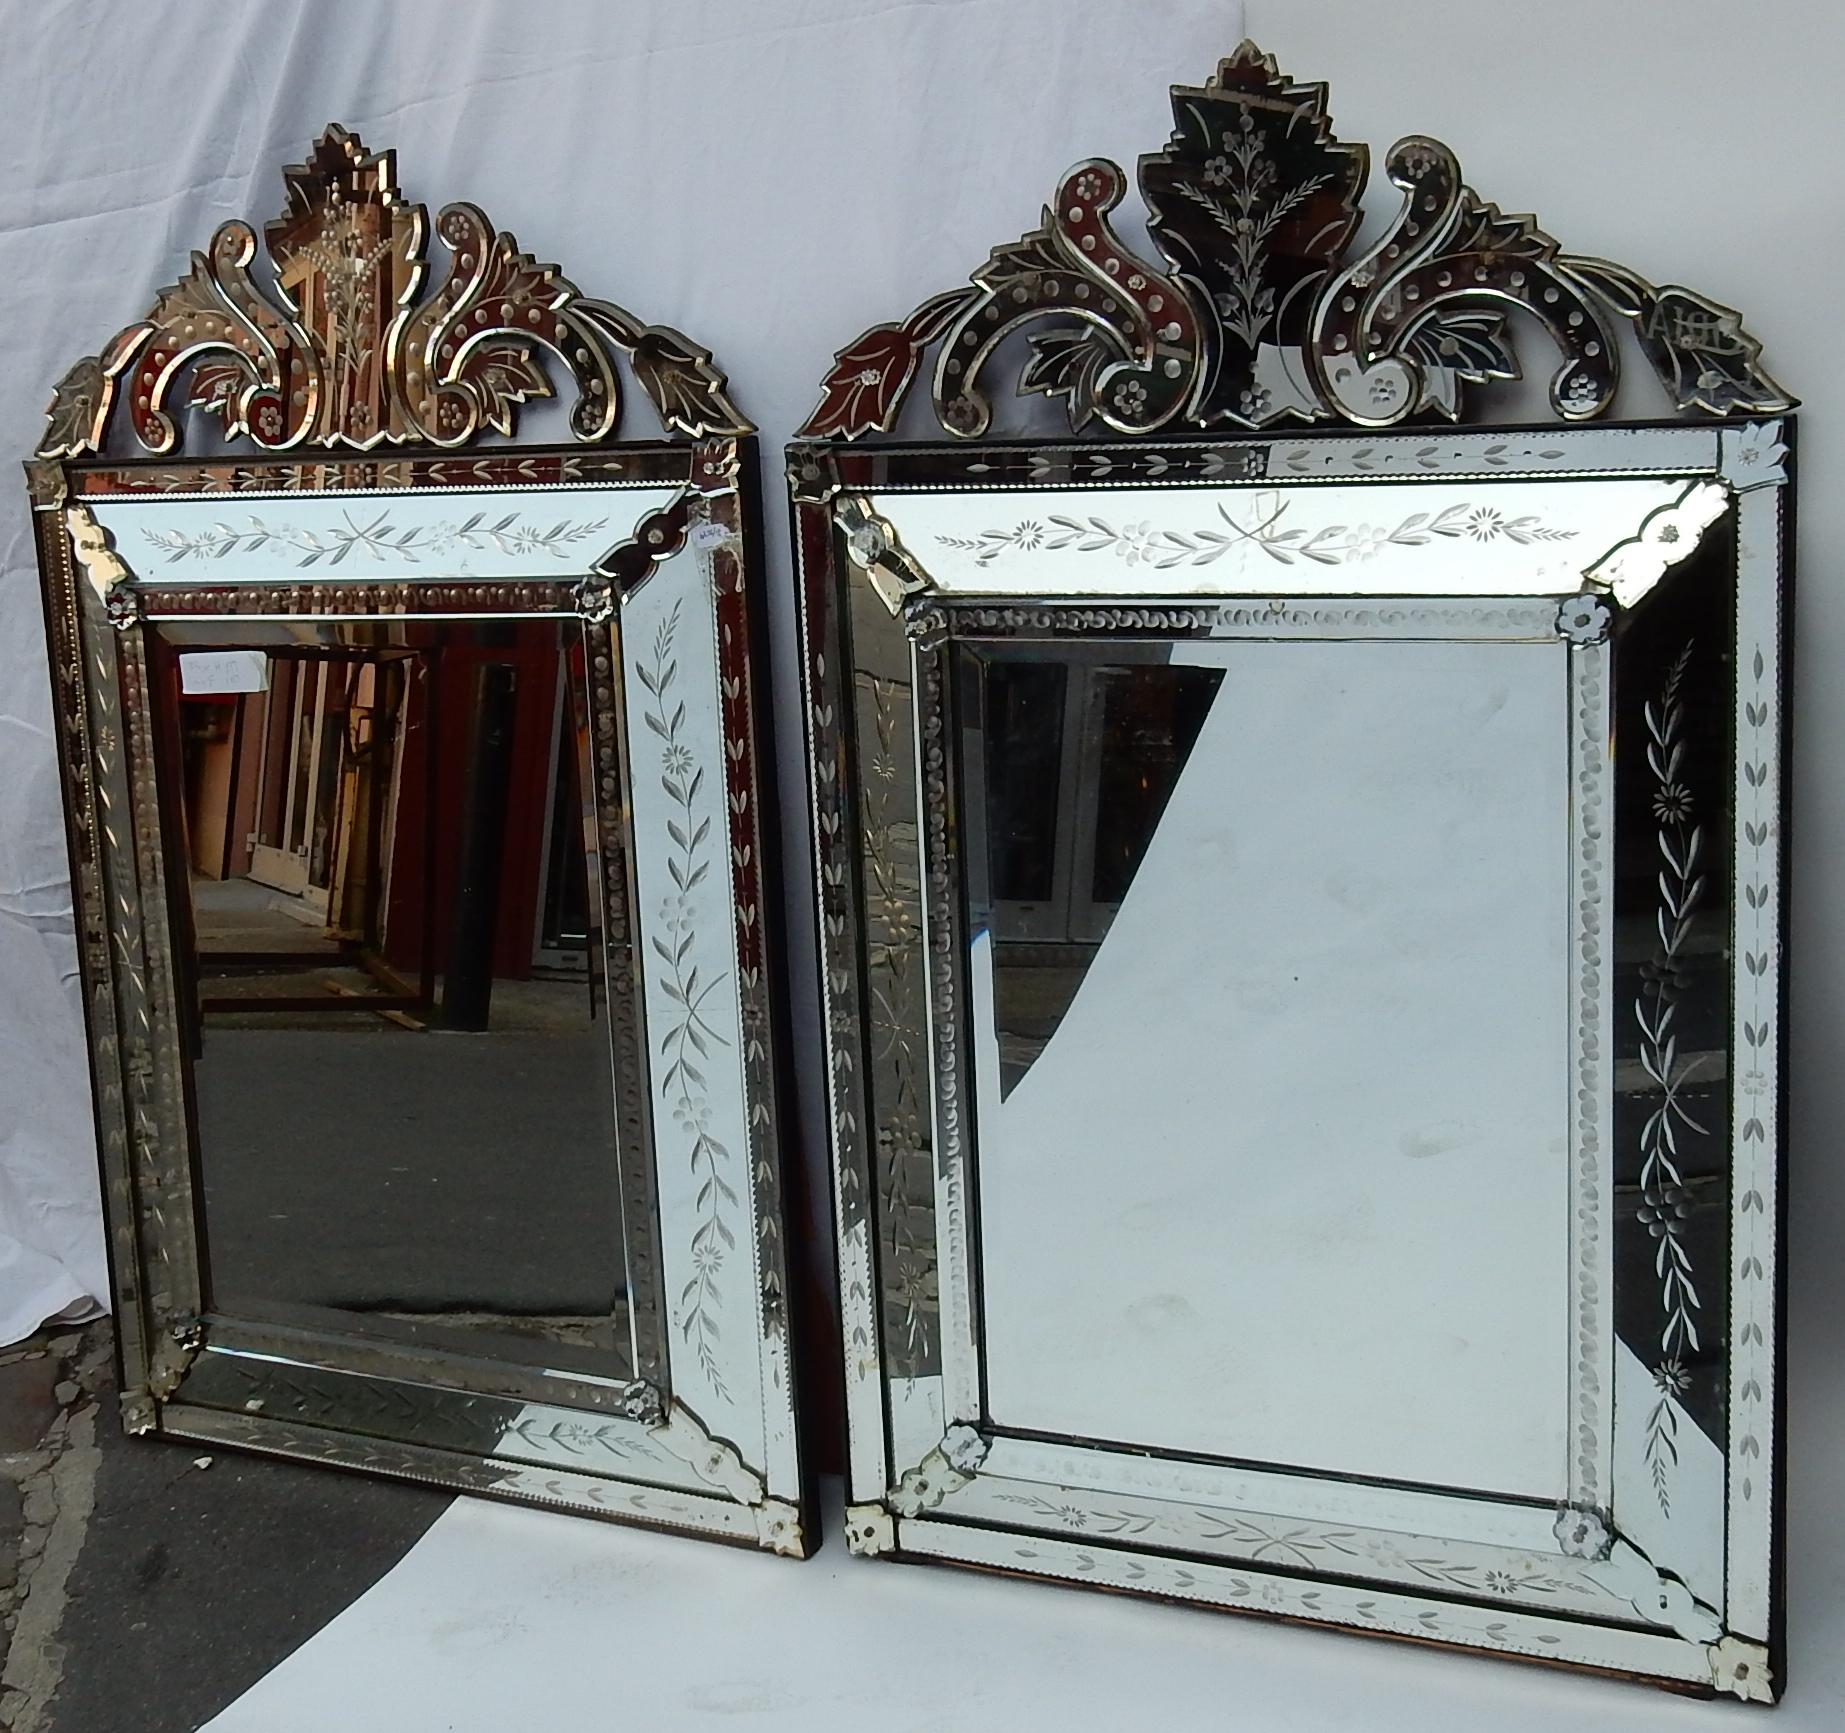 1950s pair of Venetian mirrors with floral decor and pediment. Good condition.